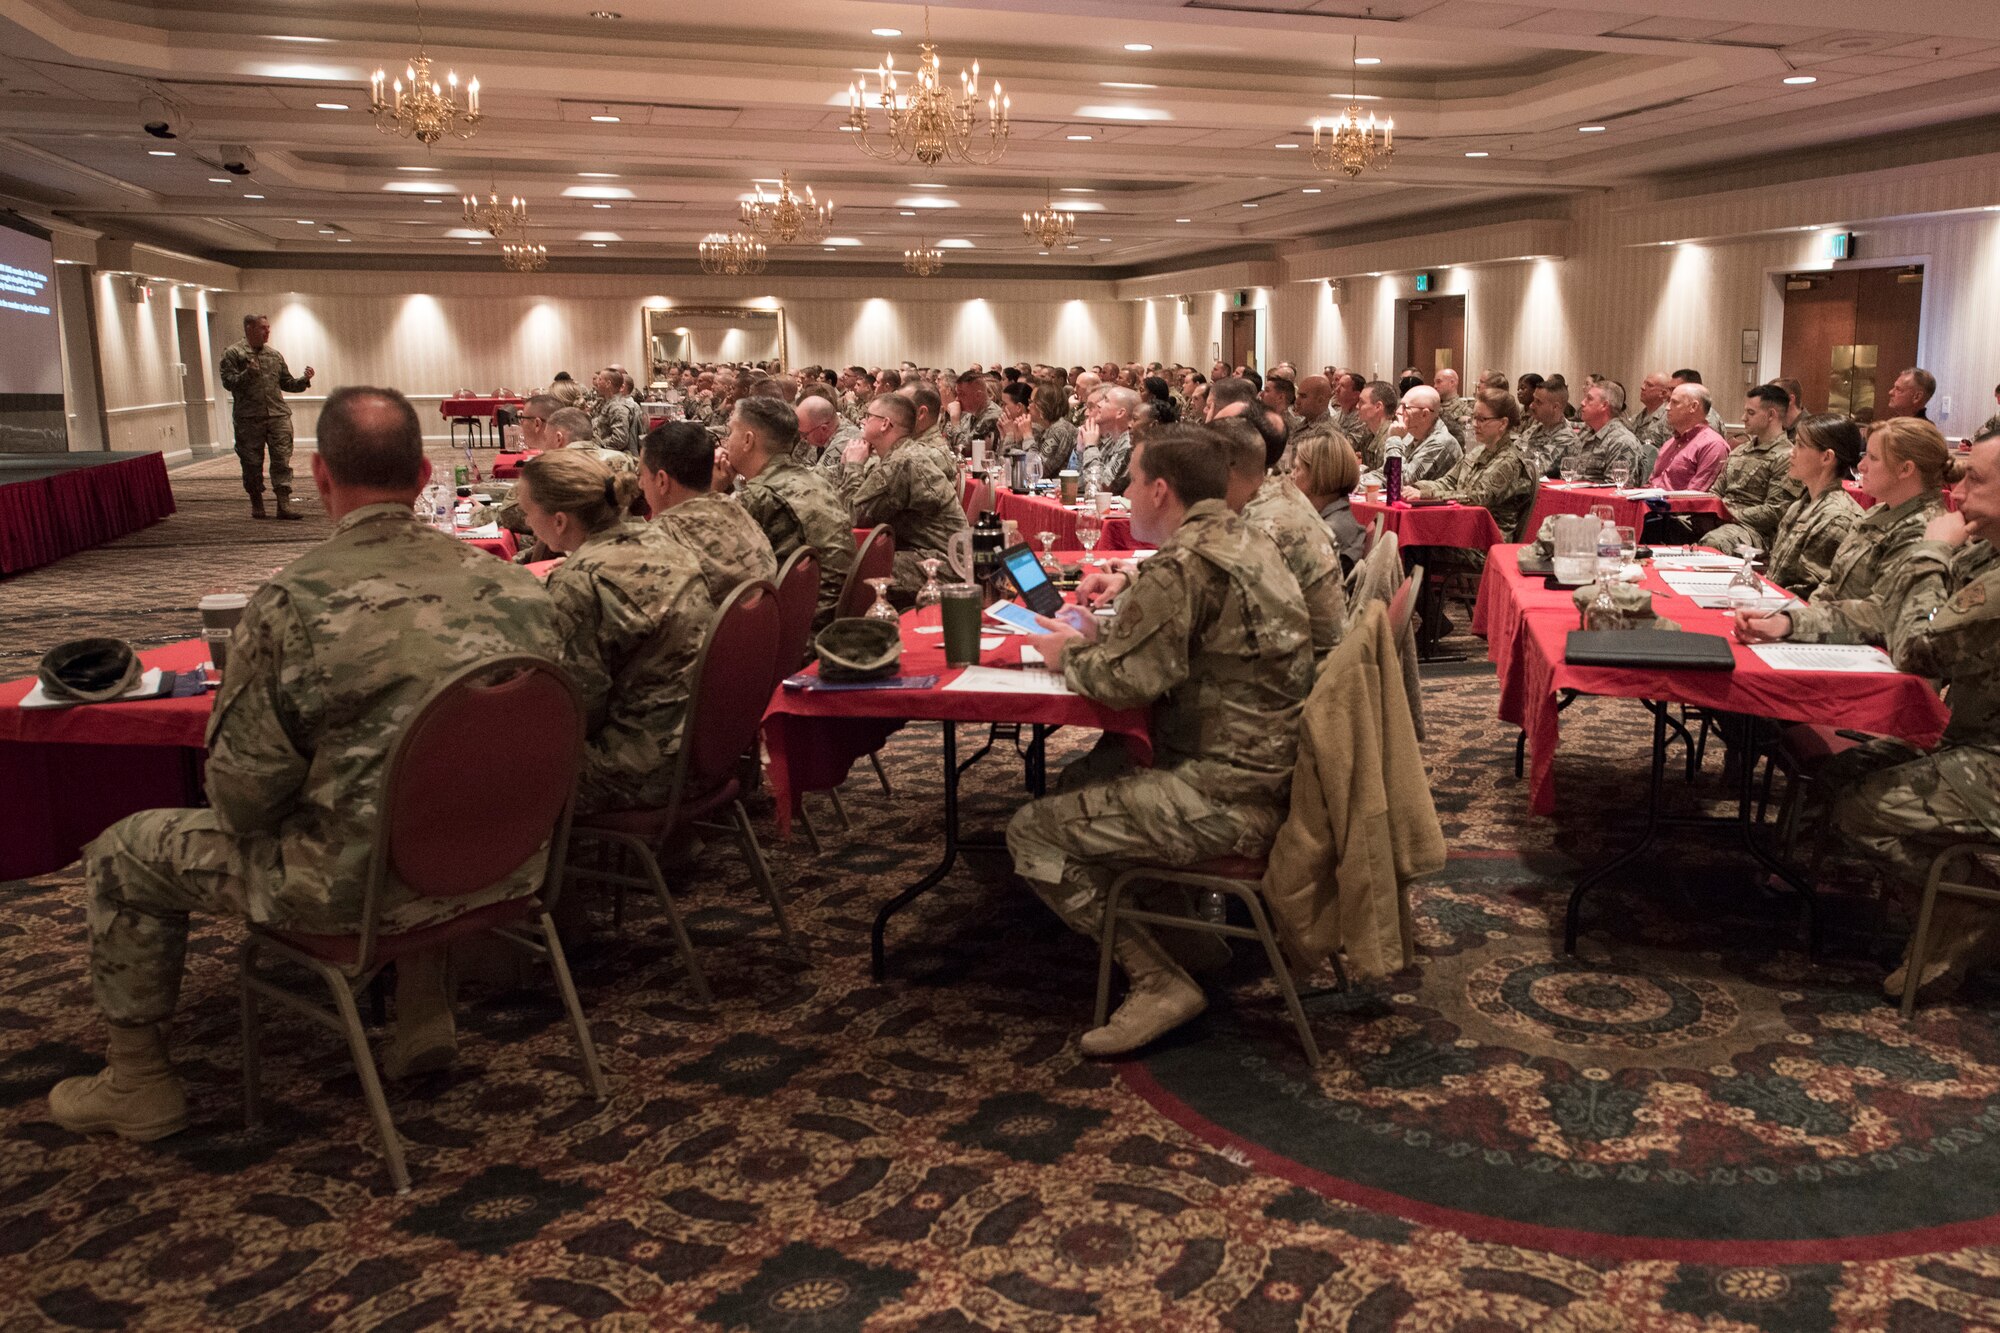 Nearly 200 Airmen from 40 Air National Guard units nation-wide attended the two-day course Contemporary Base Issues Course hosted by the 167th Airlift Wing and held at the Clarion Hotel and Conference Center in Shepherdstown, W.Va., Nov. 15, 2019.